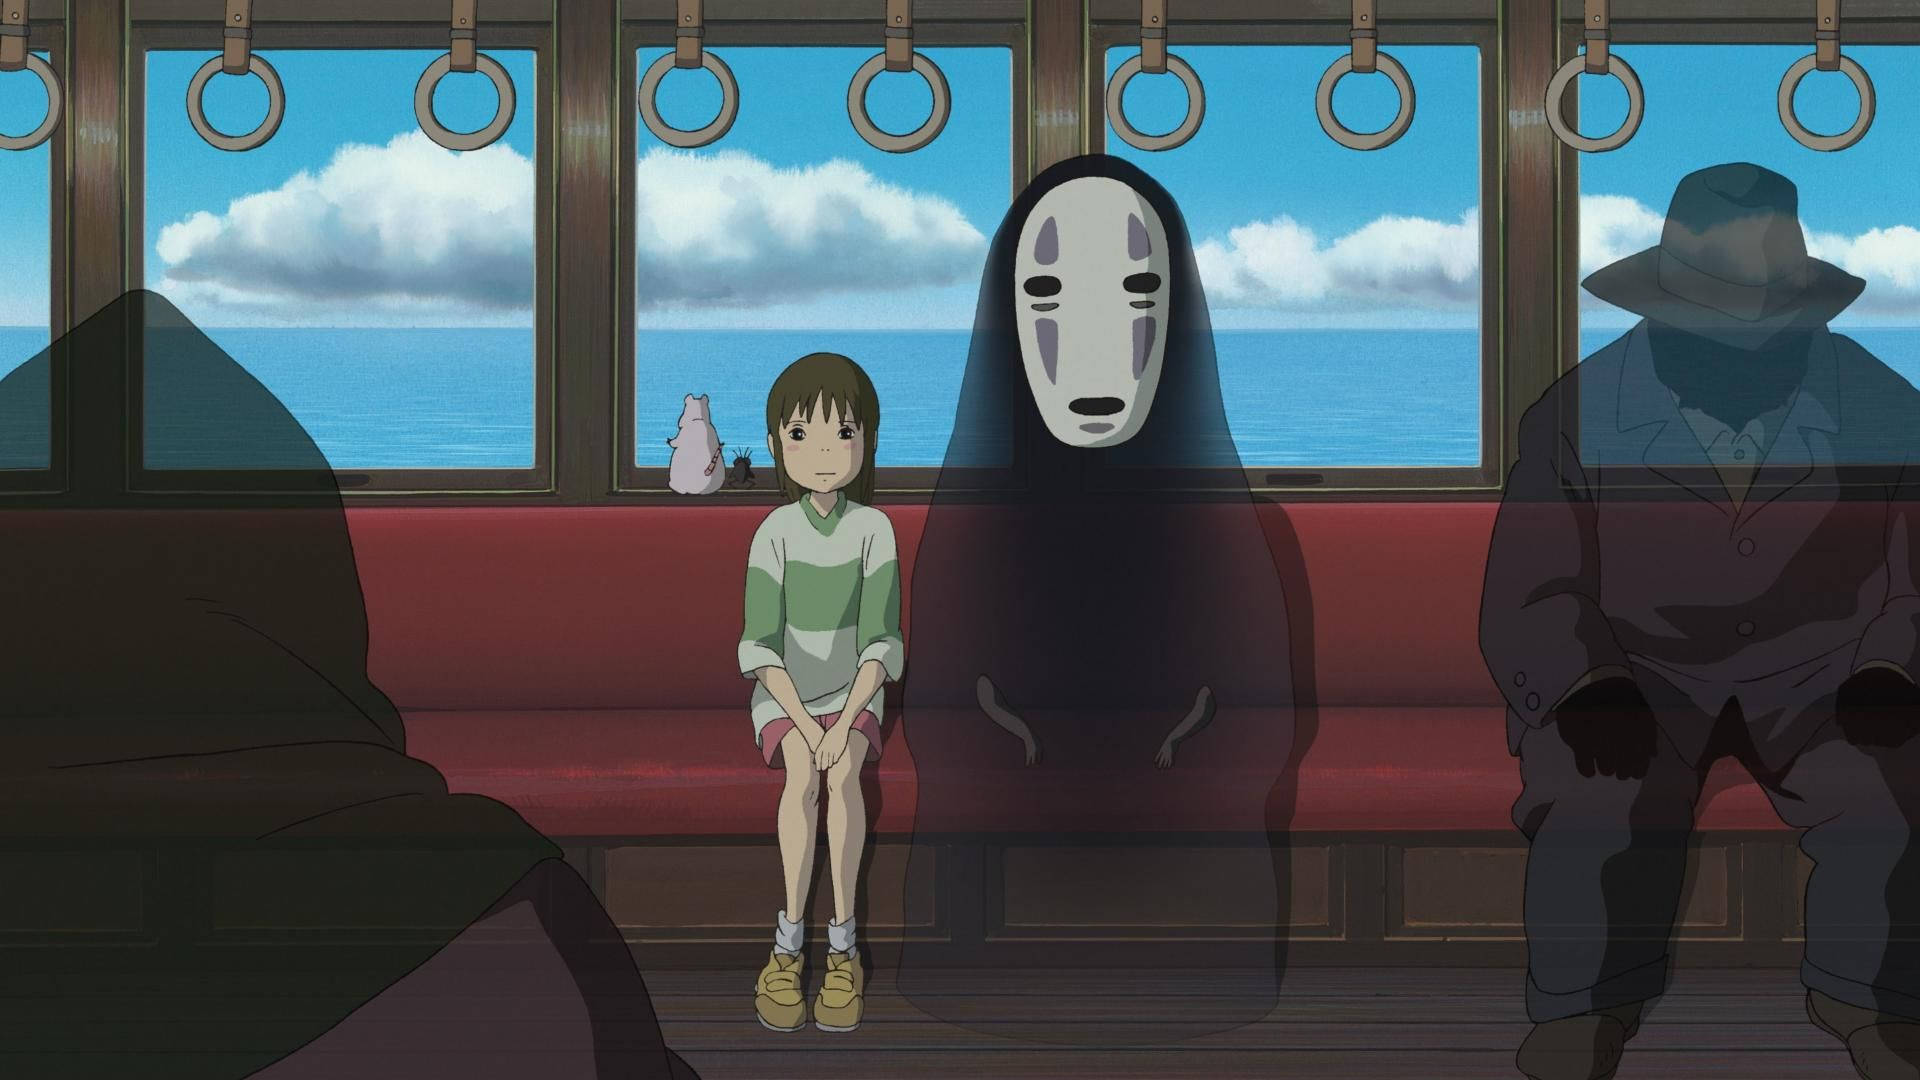 Chihiro traversing the spirit world with her No-Face companion Wallpaper